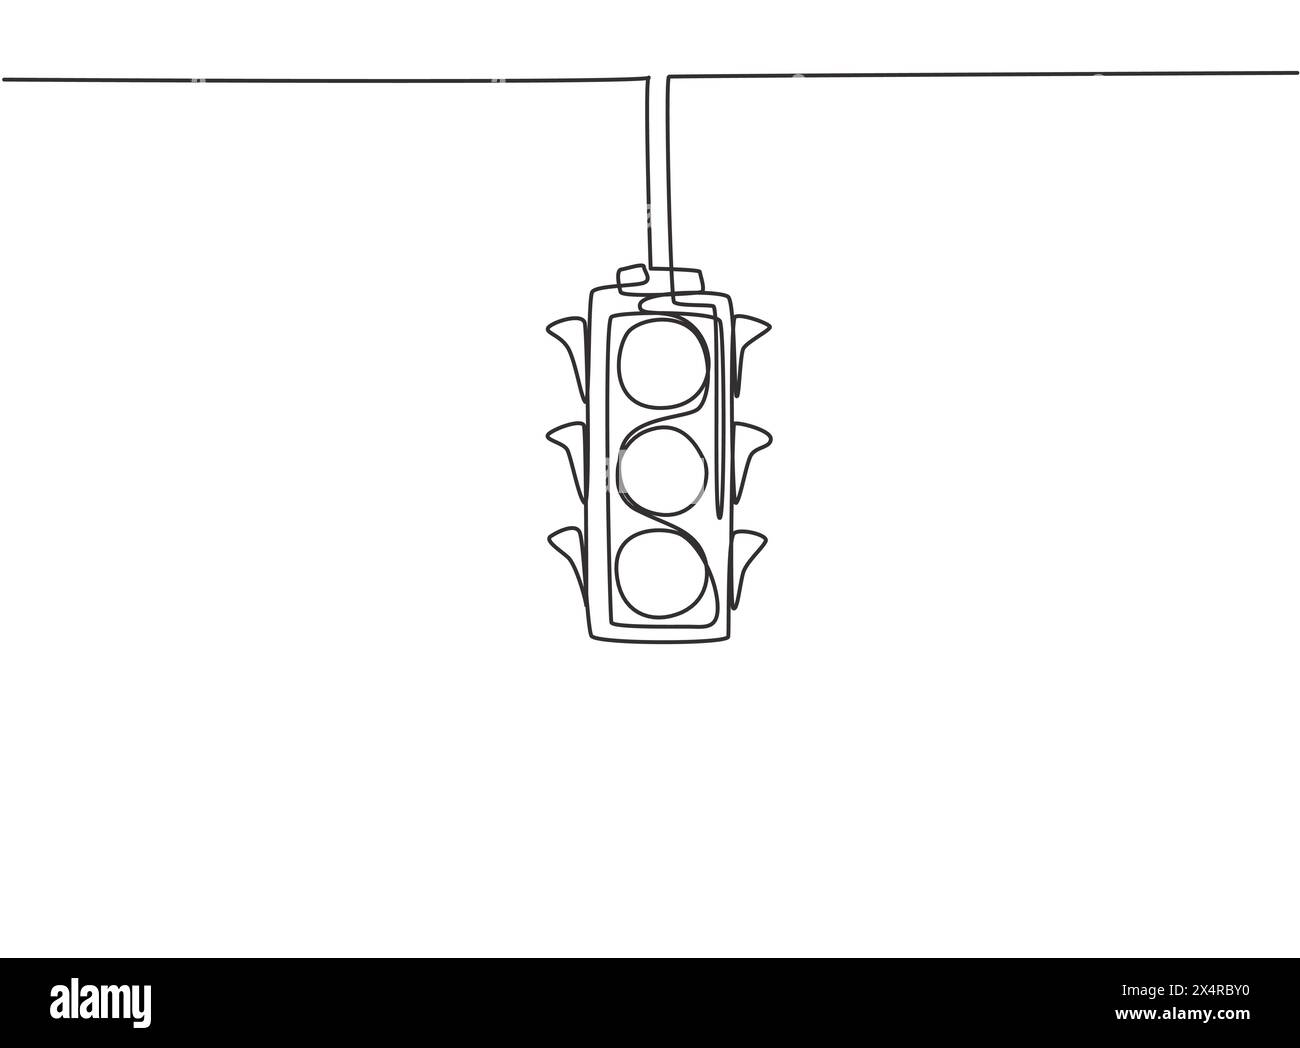 Single continuous line drawing of traffic lights that are placed hanging above the highway crossing. There are four direction traffic lights. Dynamic Stock Vector